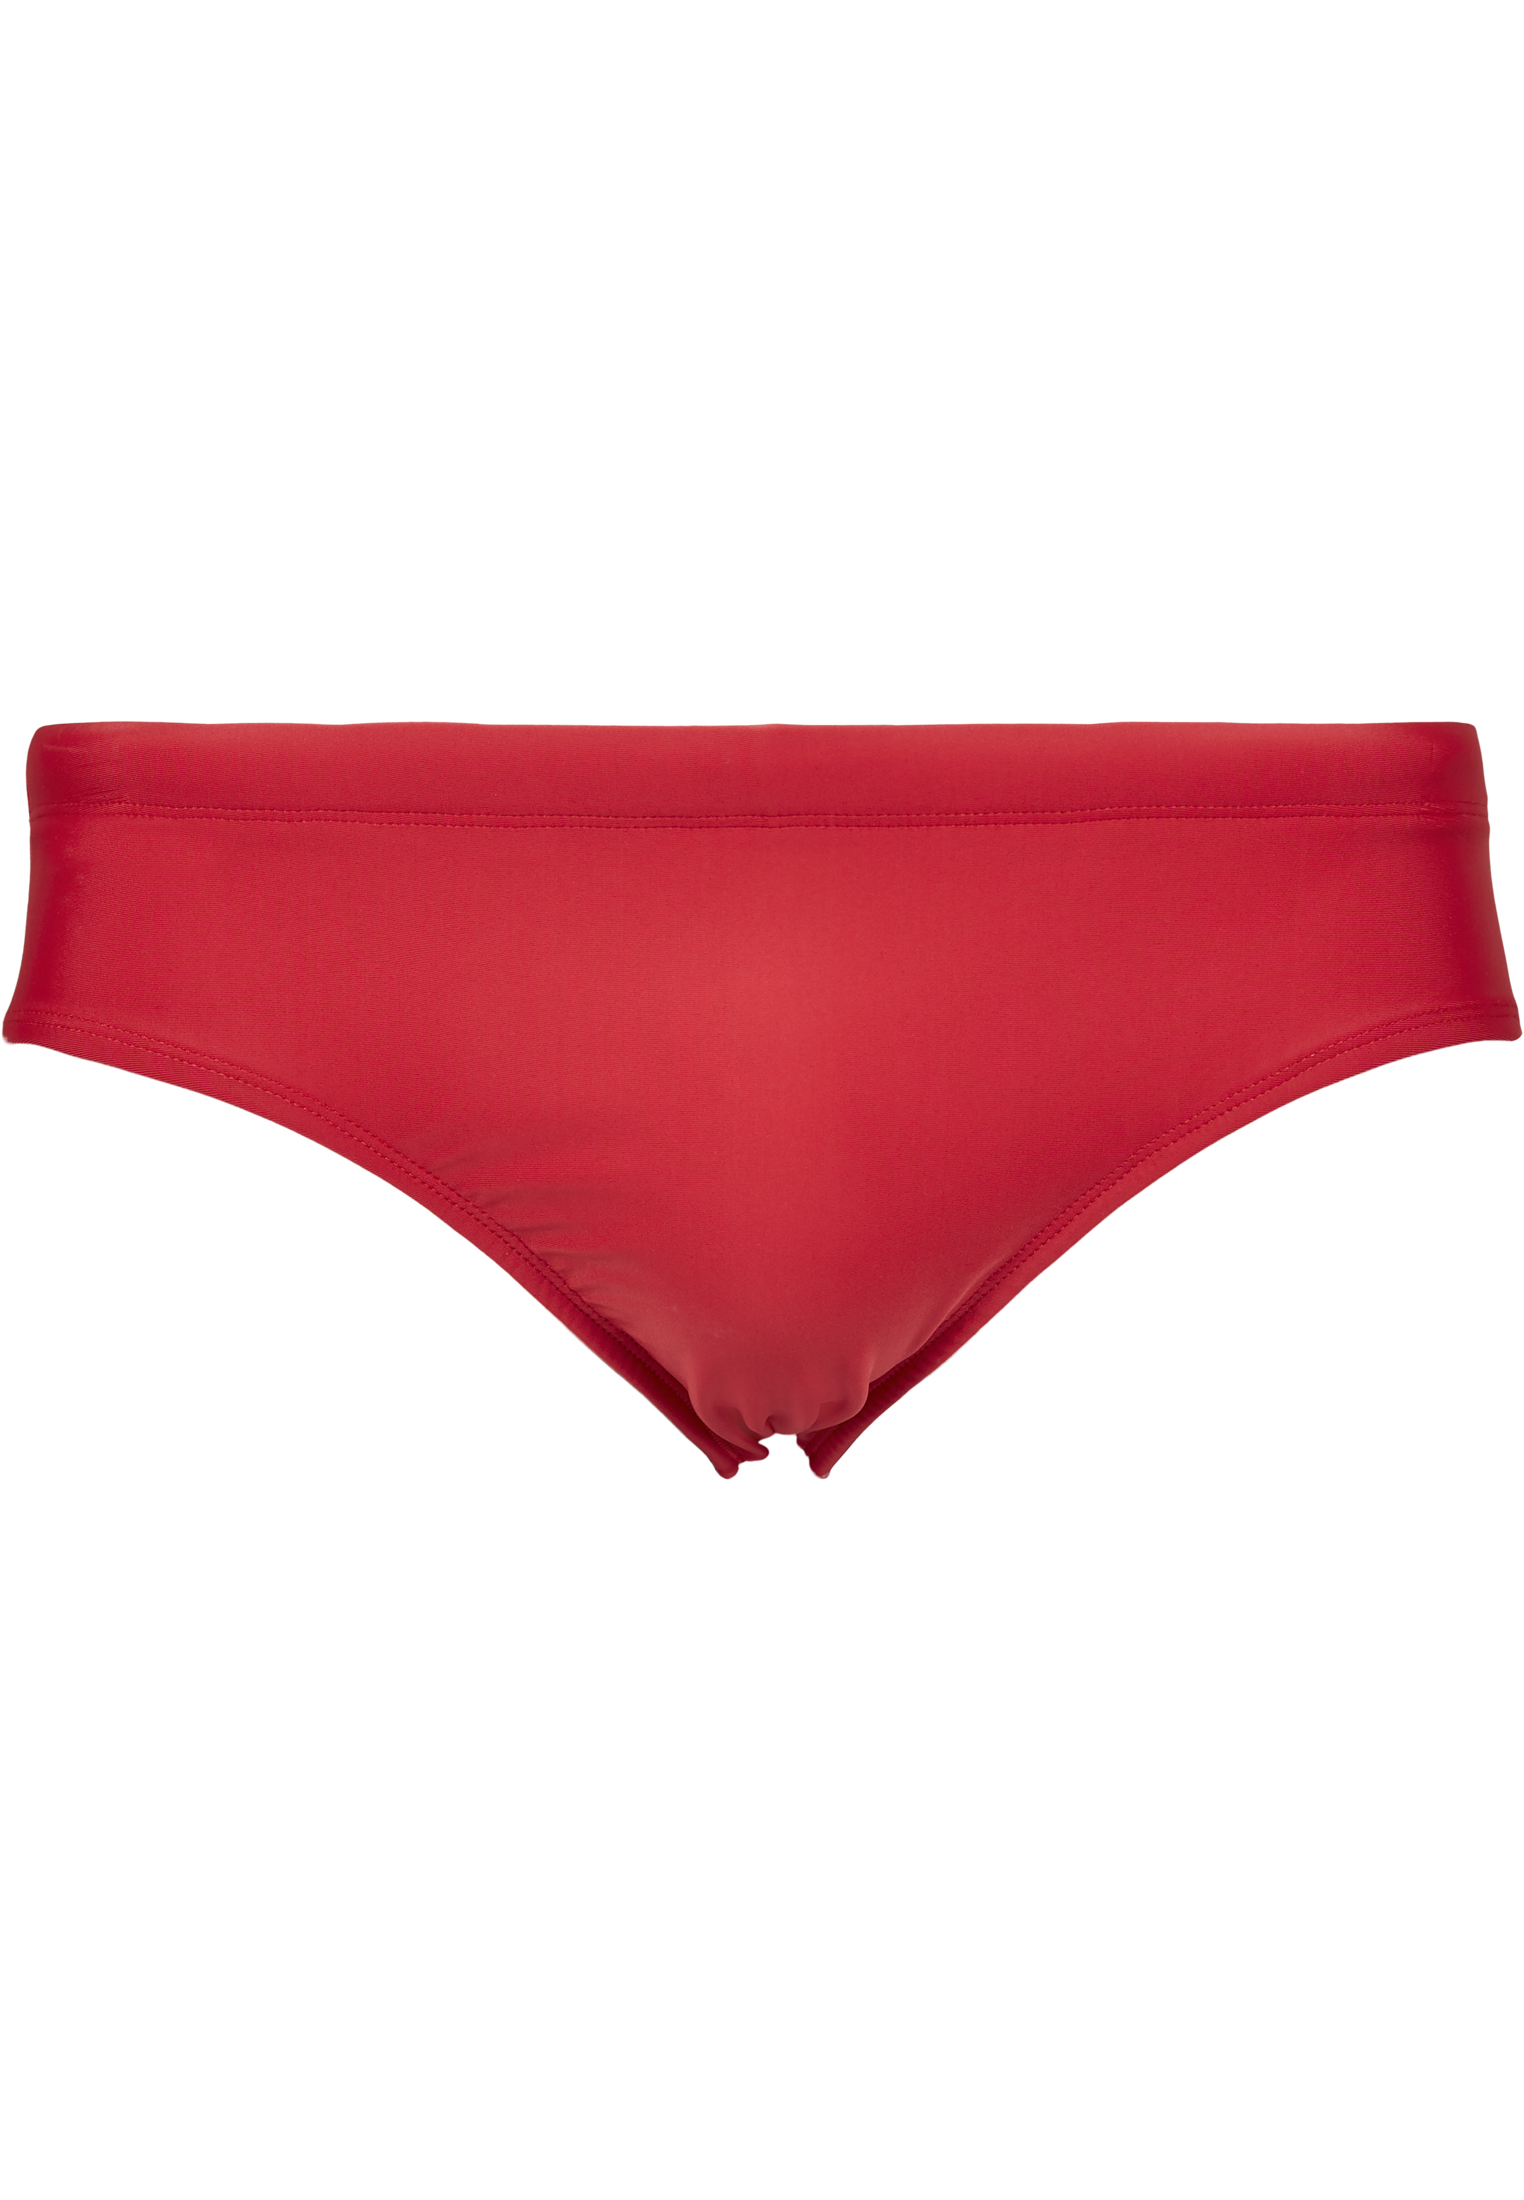 Bademode Basic Swim Brief in Farbe fire red